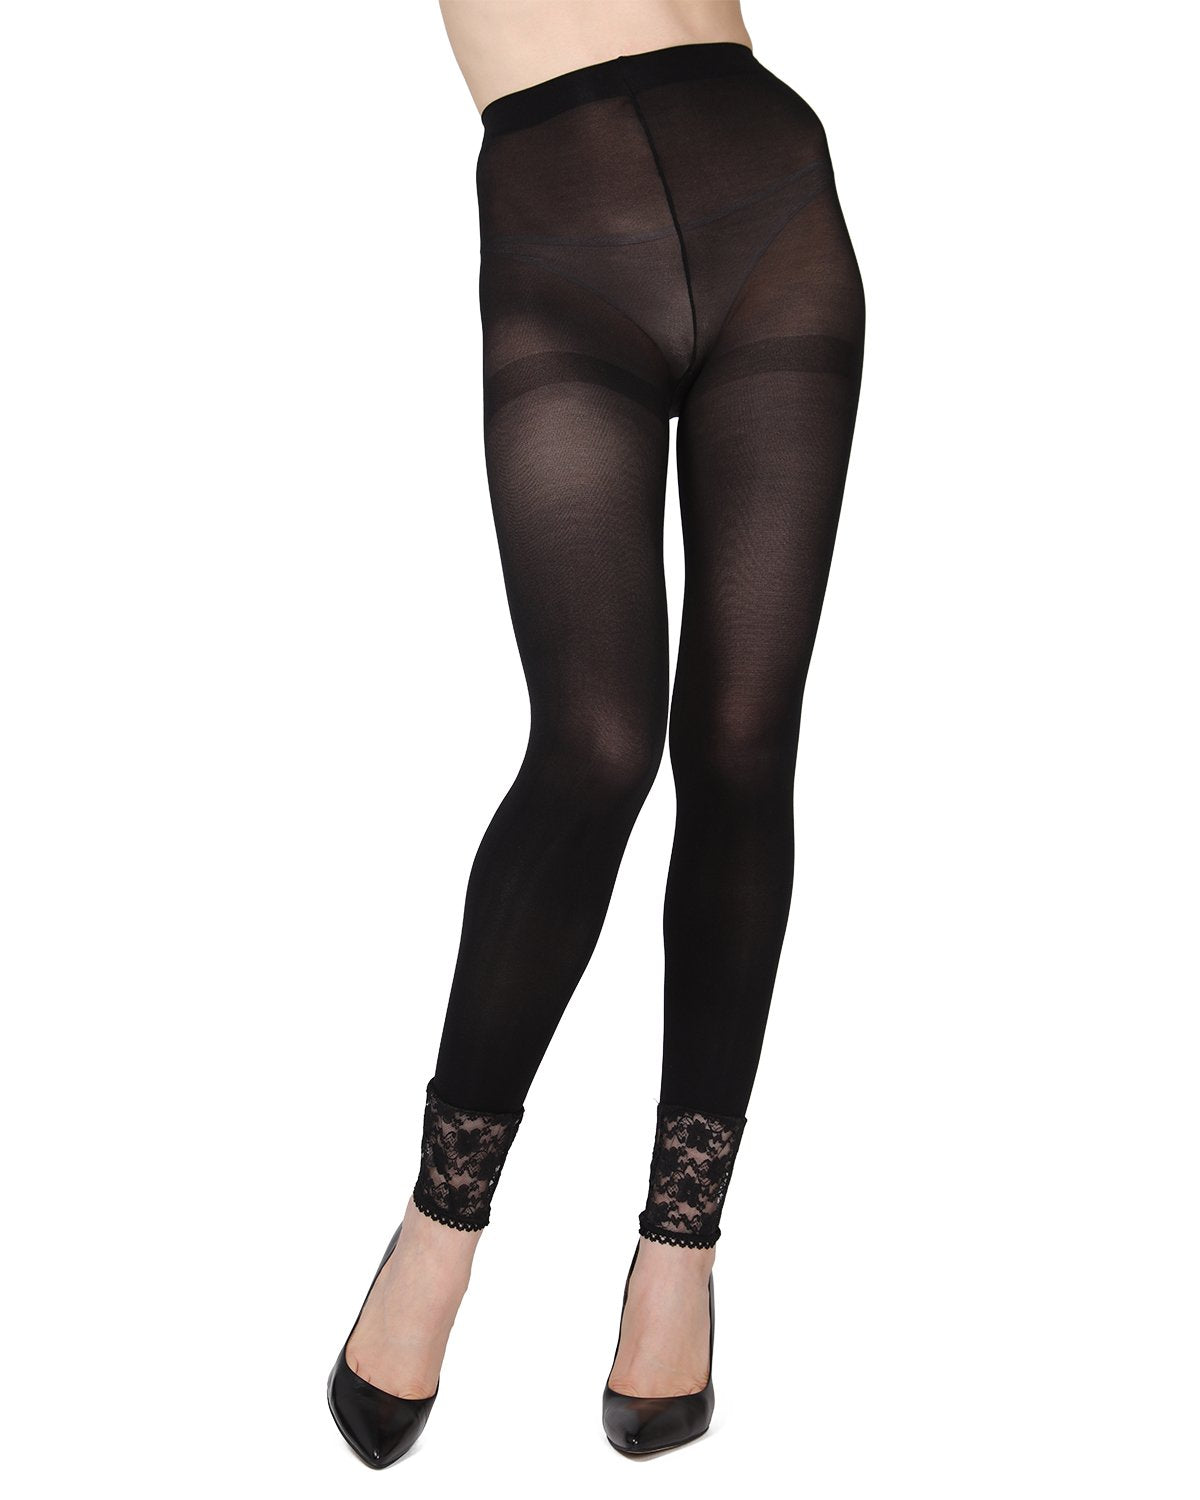 Women's Opaque Footless Tight Leggings with Lace Trim Bottom 6 Pack